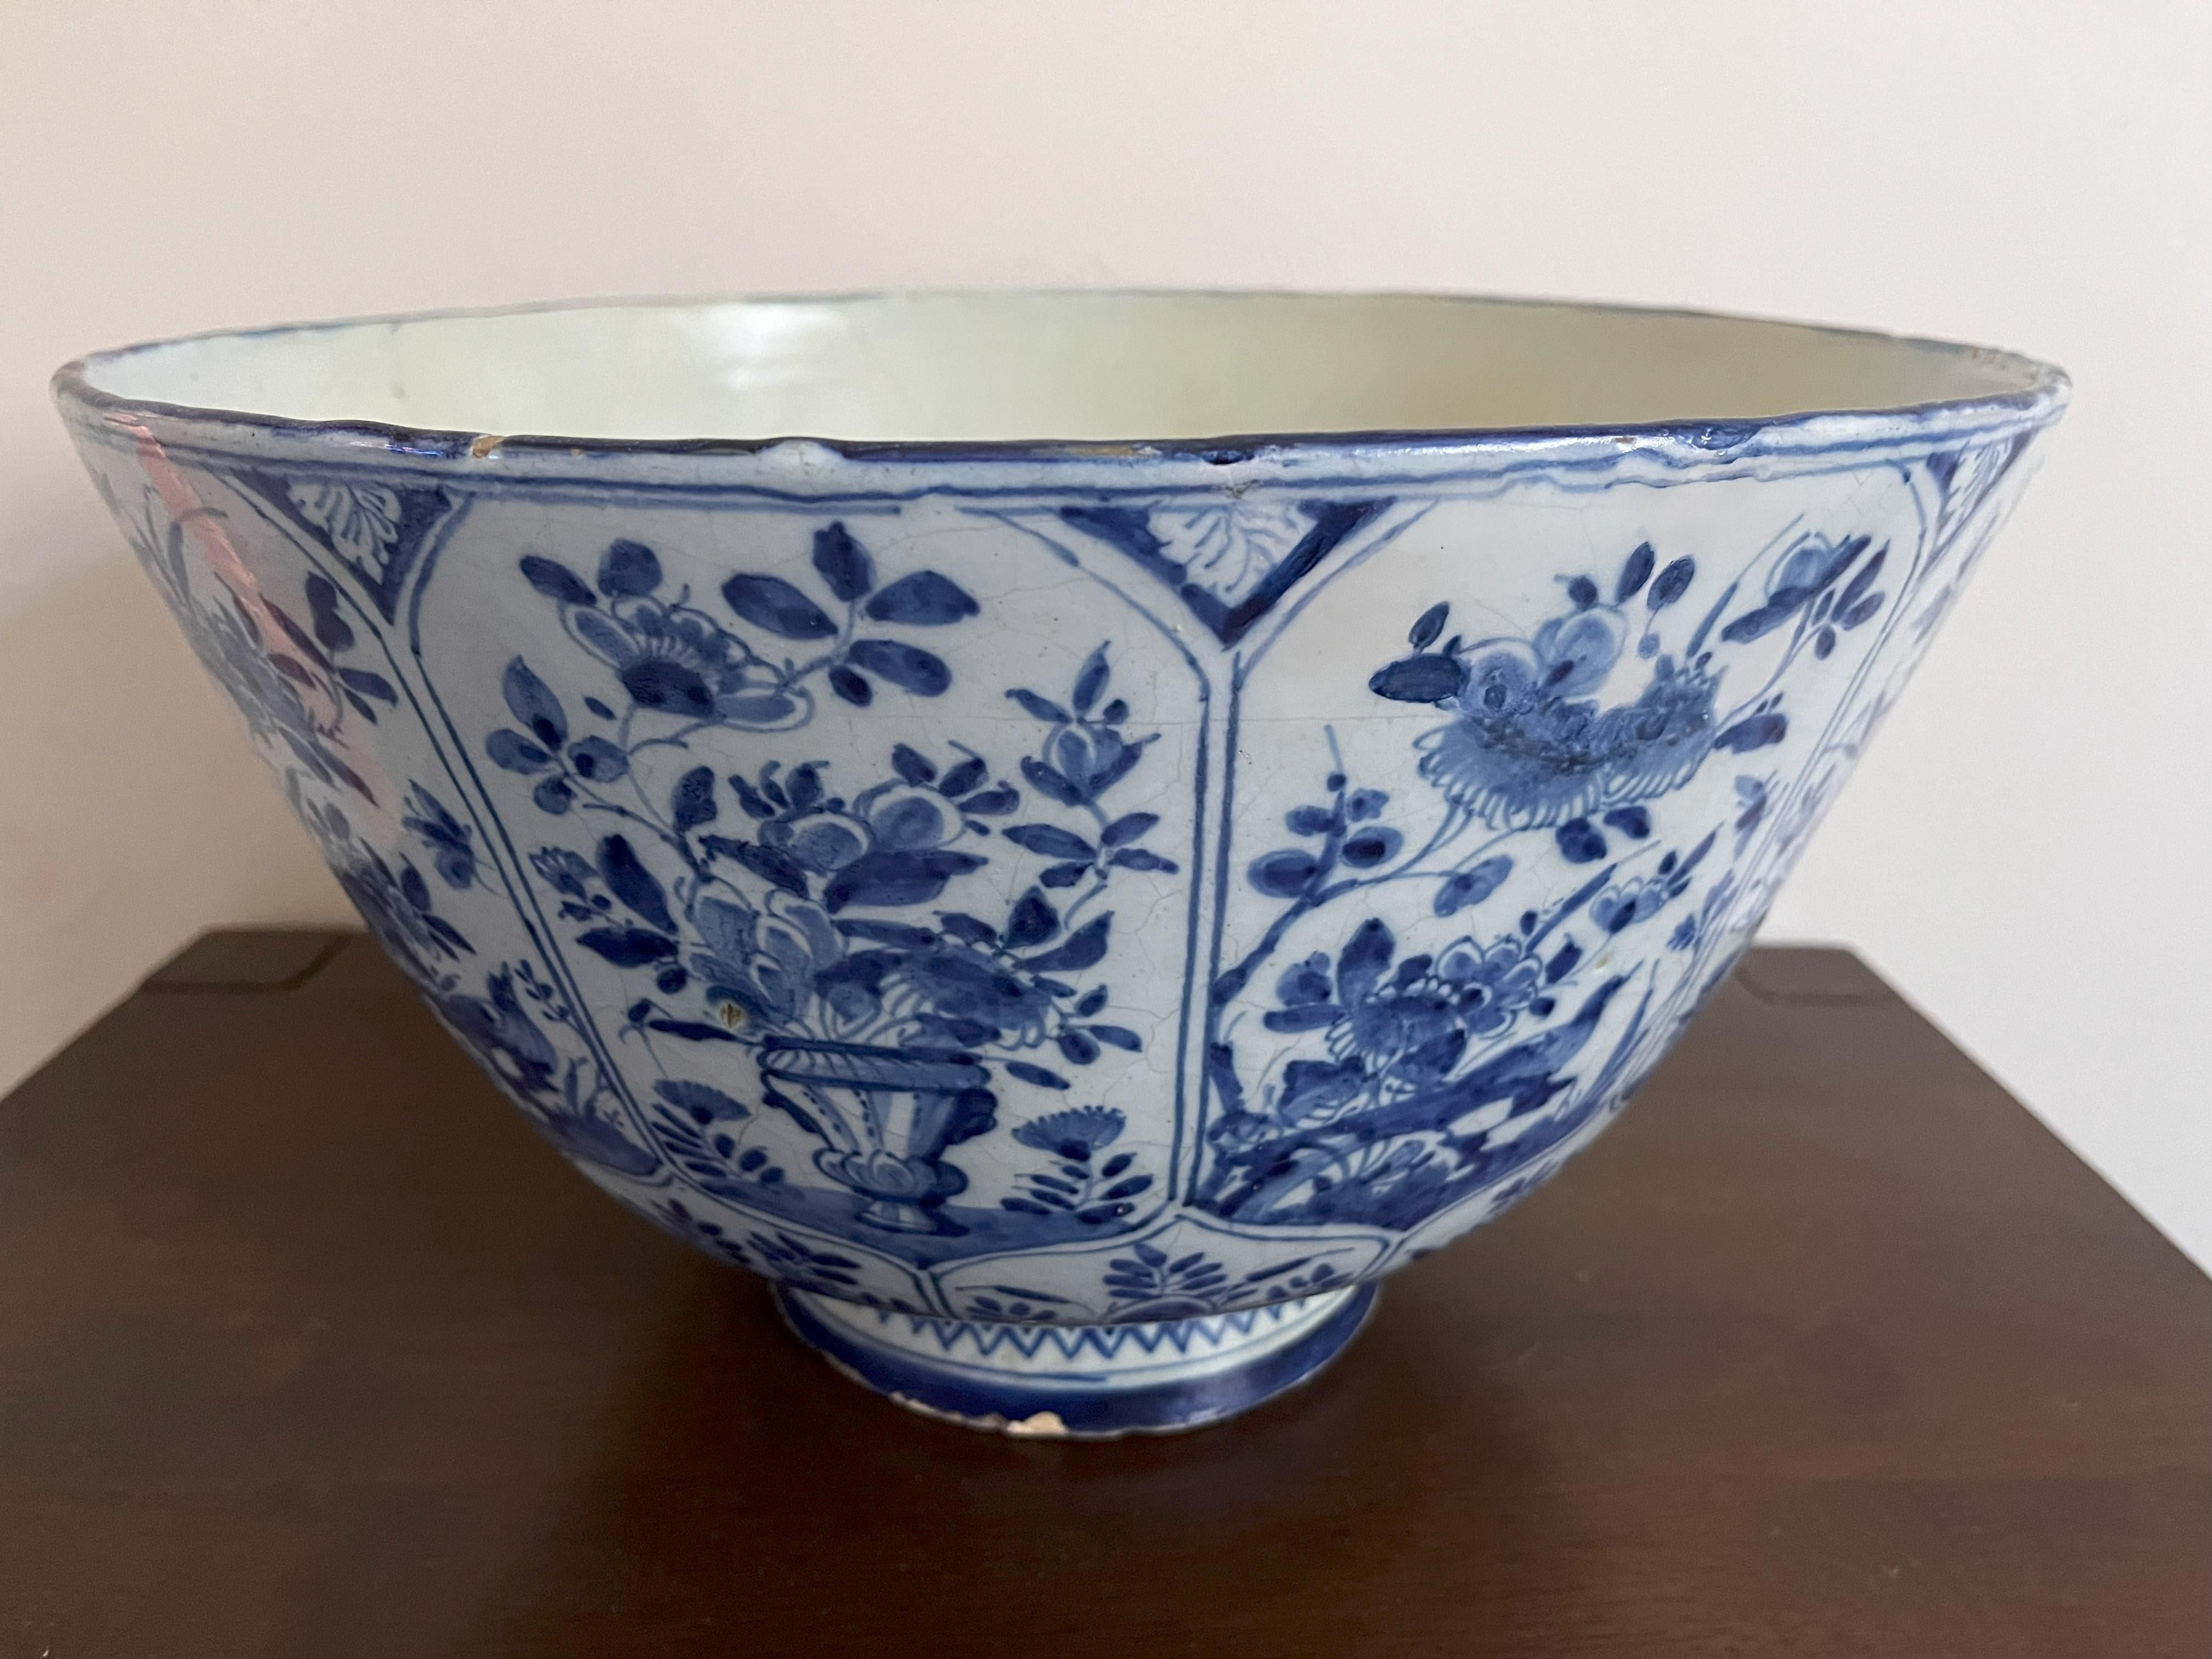 Large Delft Blue And White Punch Bowl - 18th Century In Fair Condition For Sale In Maidstone, GB